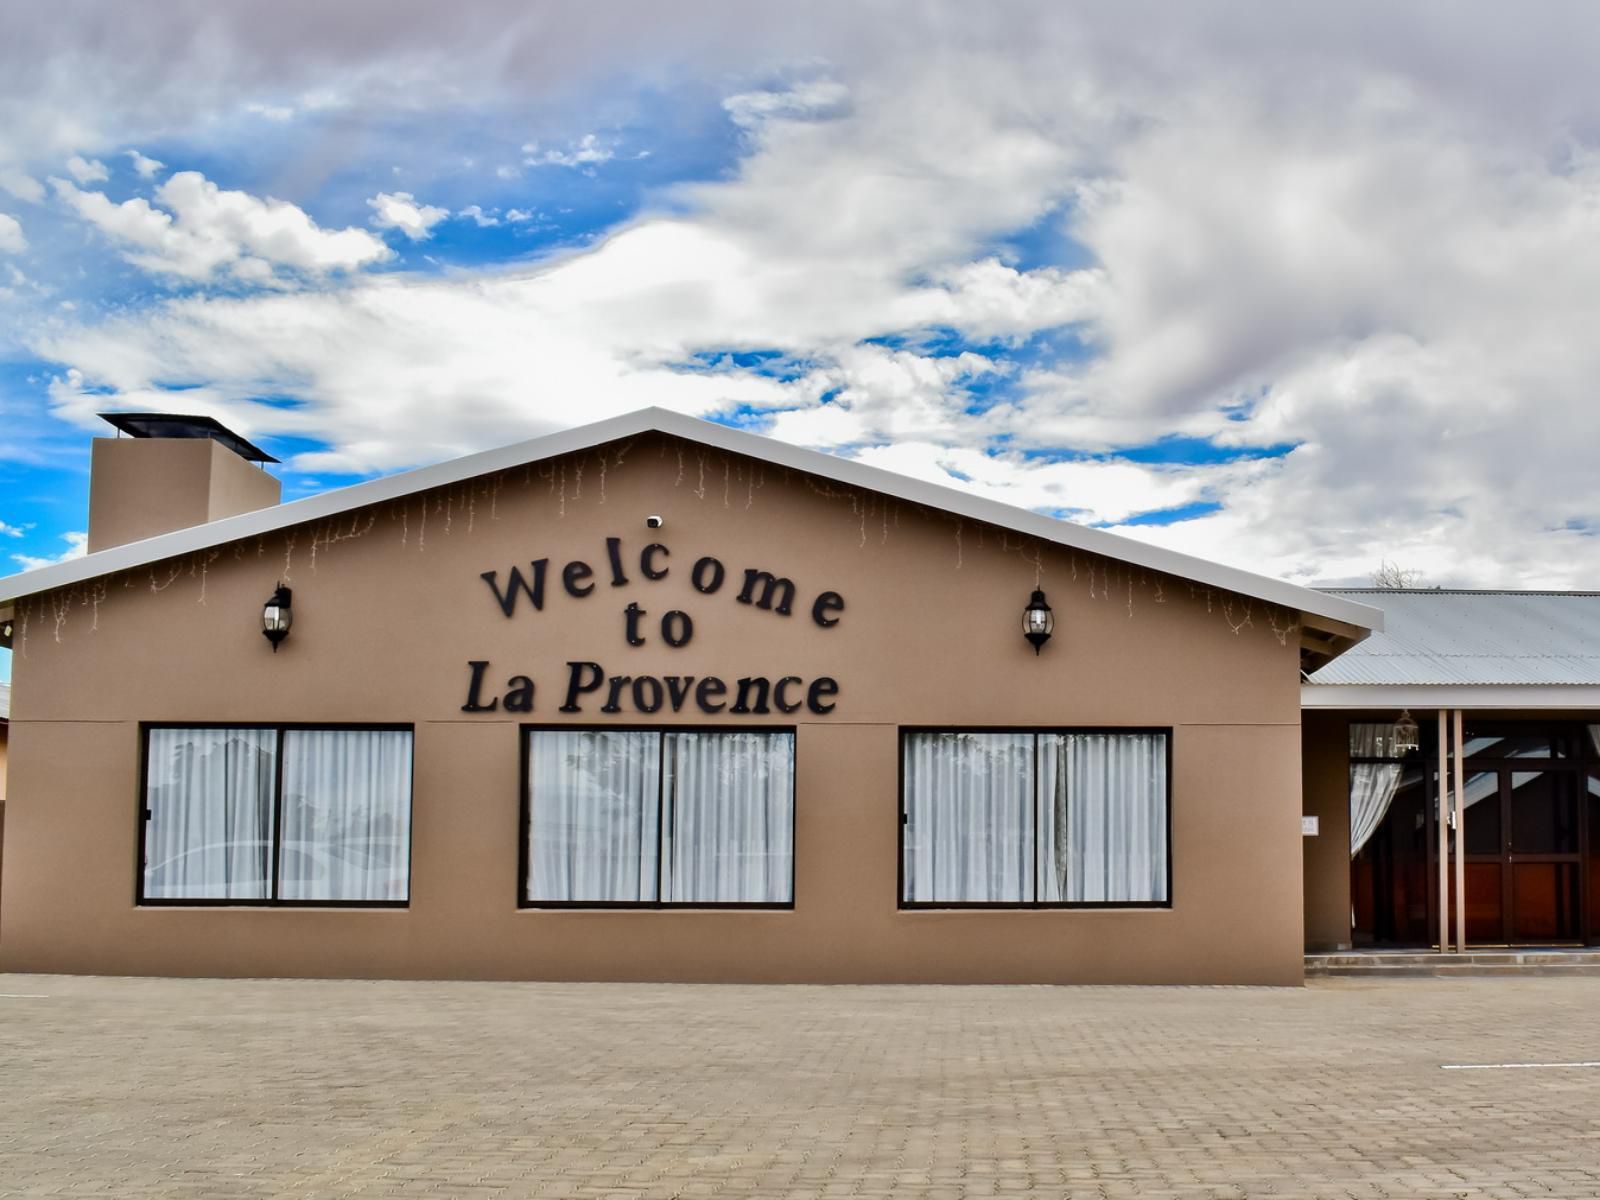 La Provence Accommodation De Aar Northern Cape South Africa 